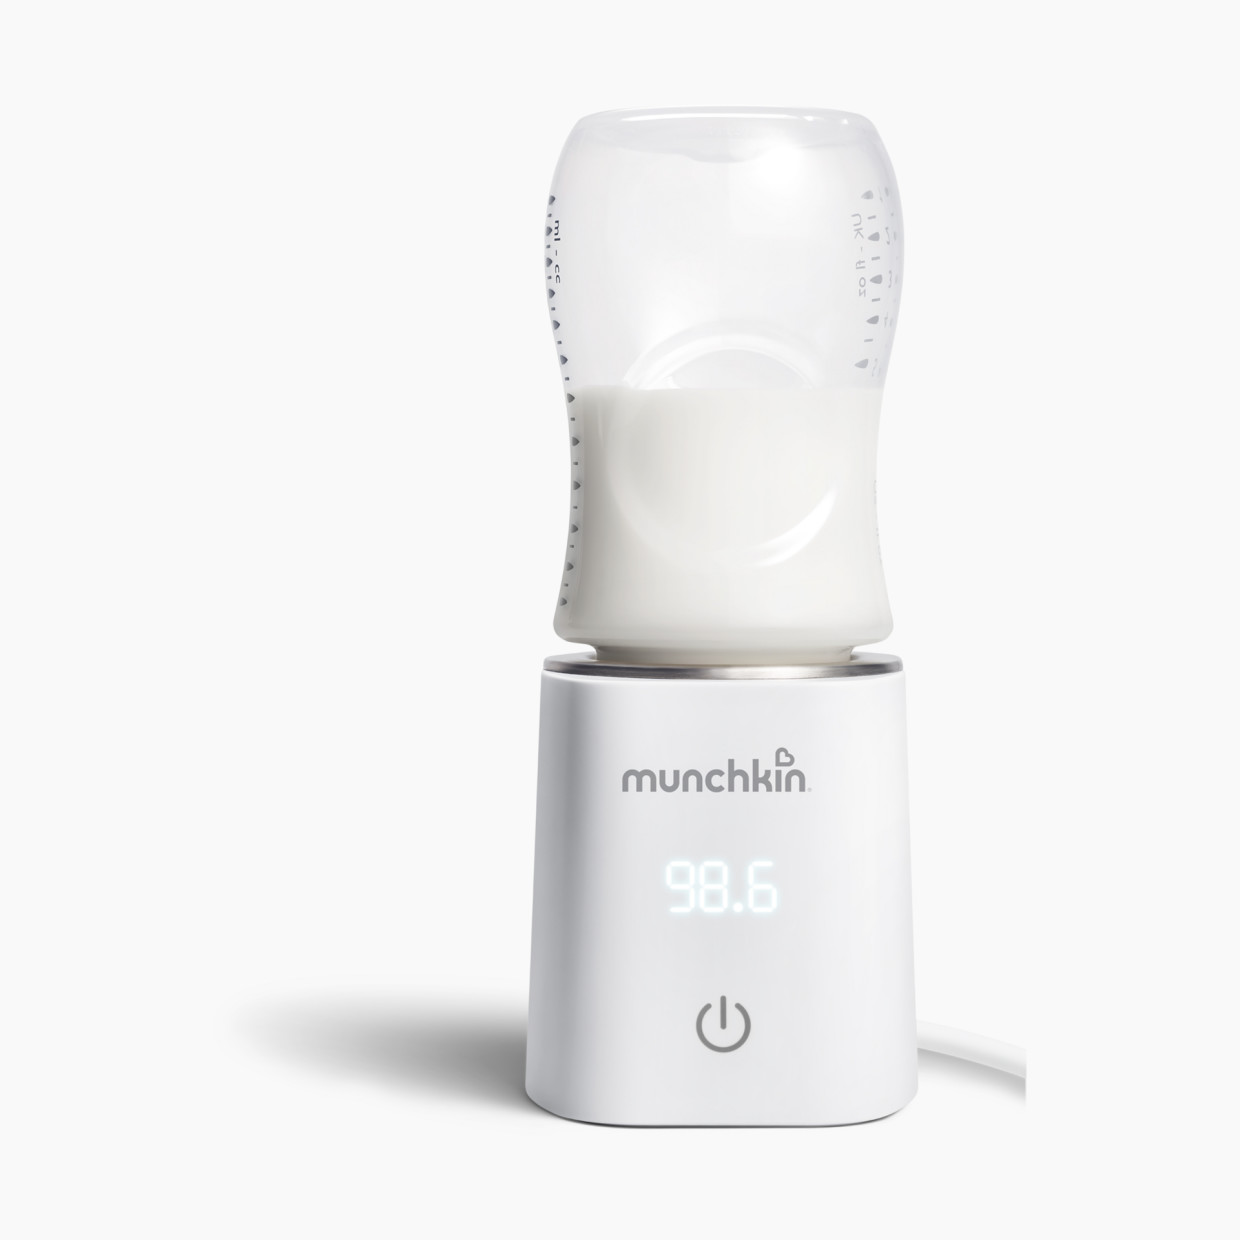 Munchkin 98° Digital Bottle Warmer - Perfect Temperature, Every Time - 1.